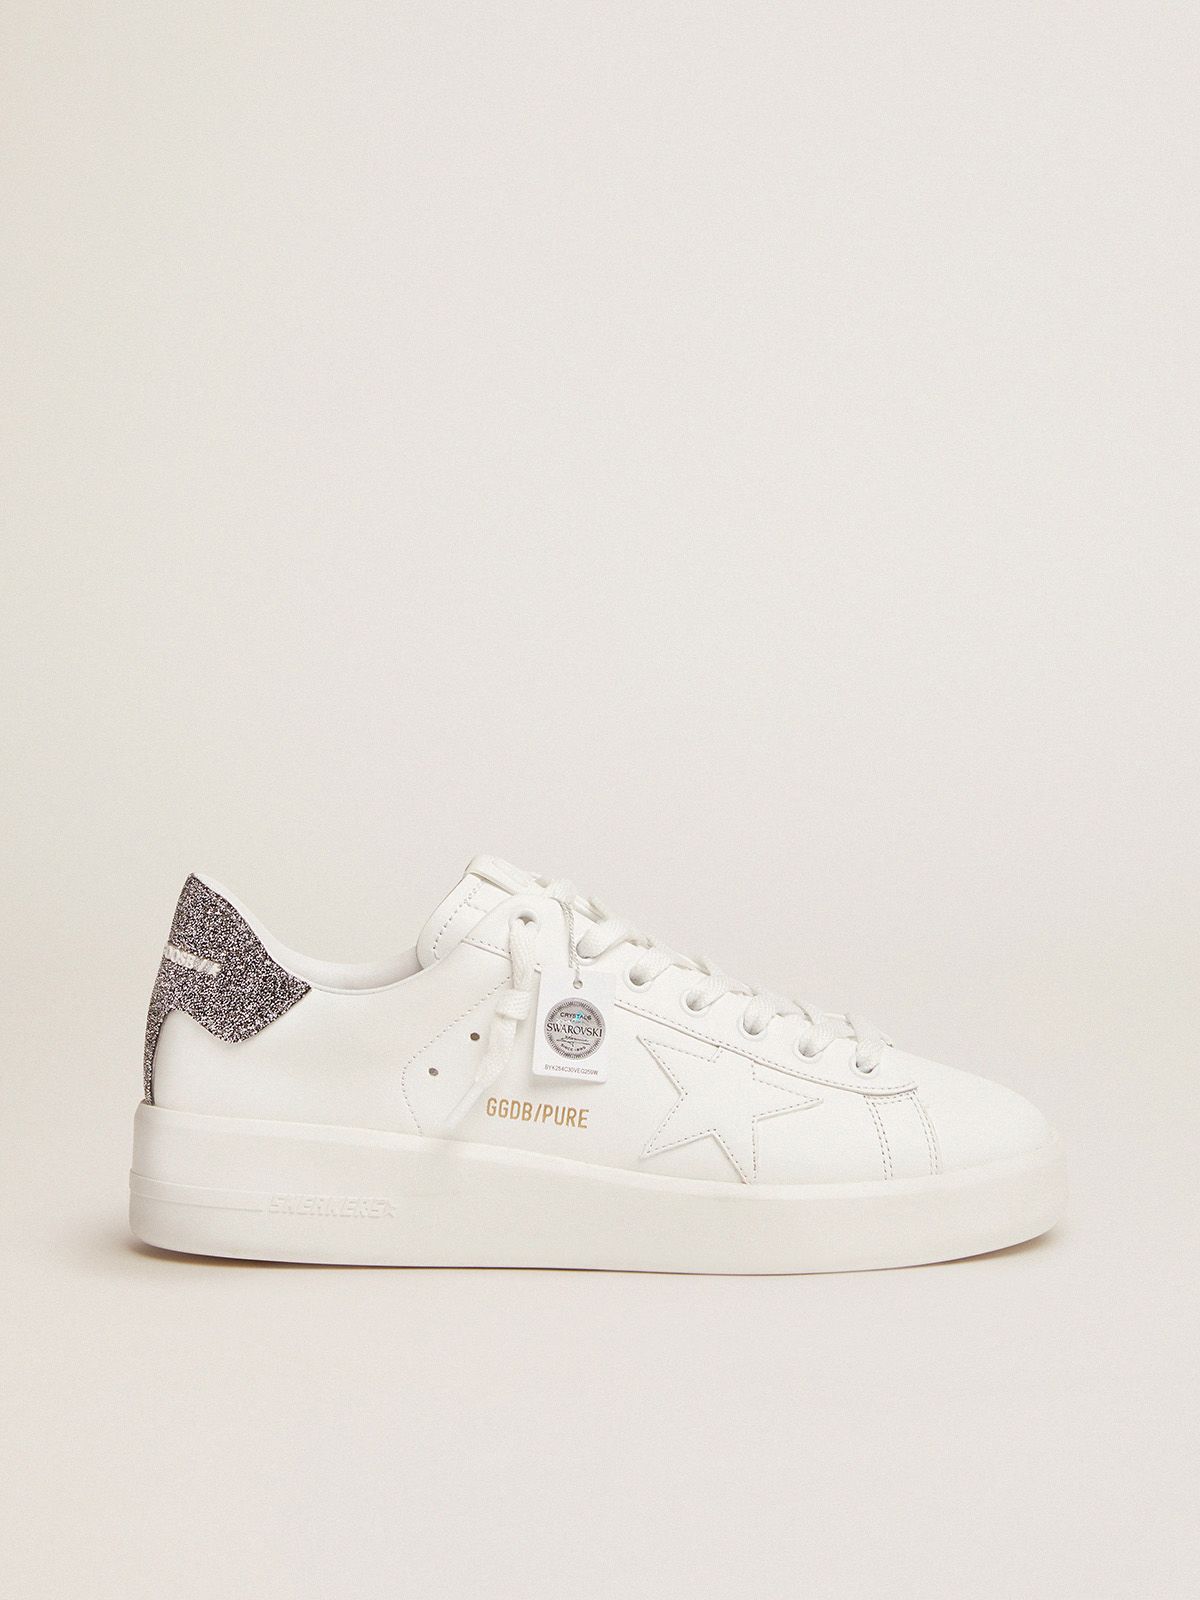 Sneakers Golden Goose Purestar sneakers in white leather with silver crystal heel tab